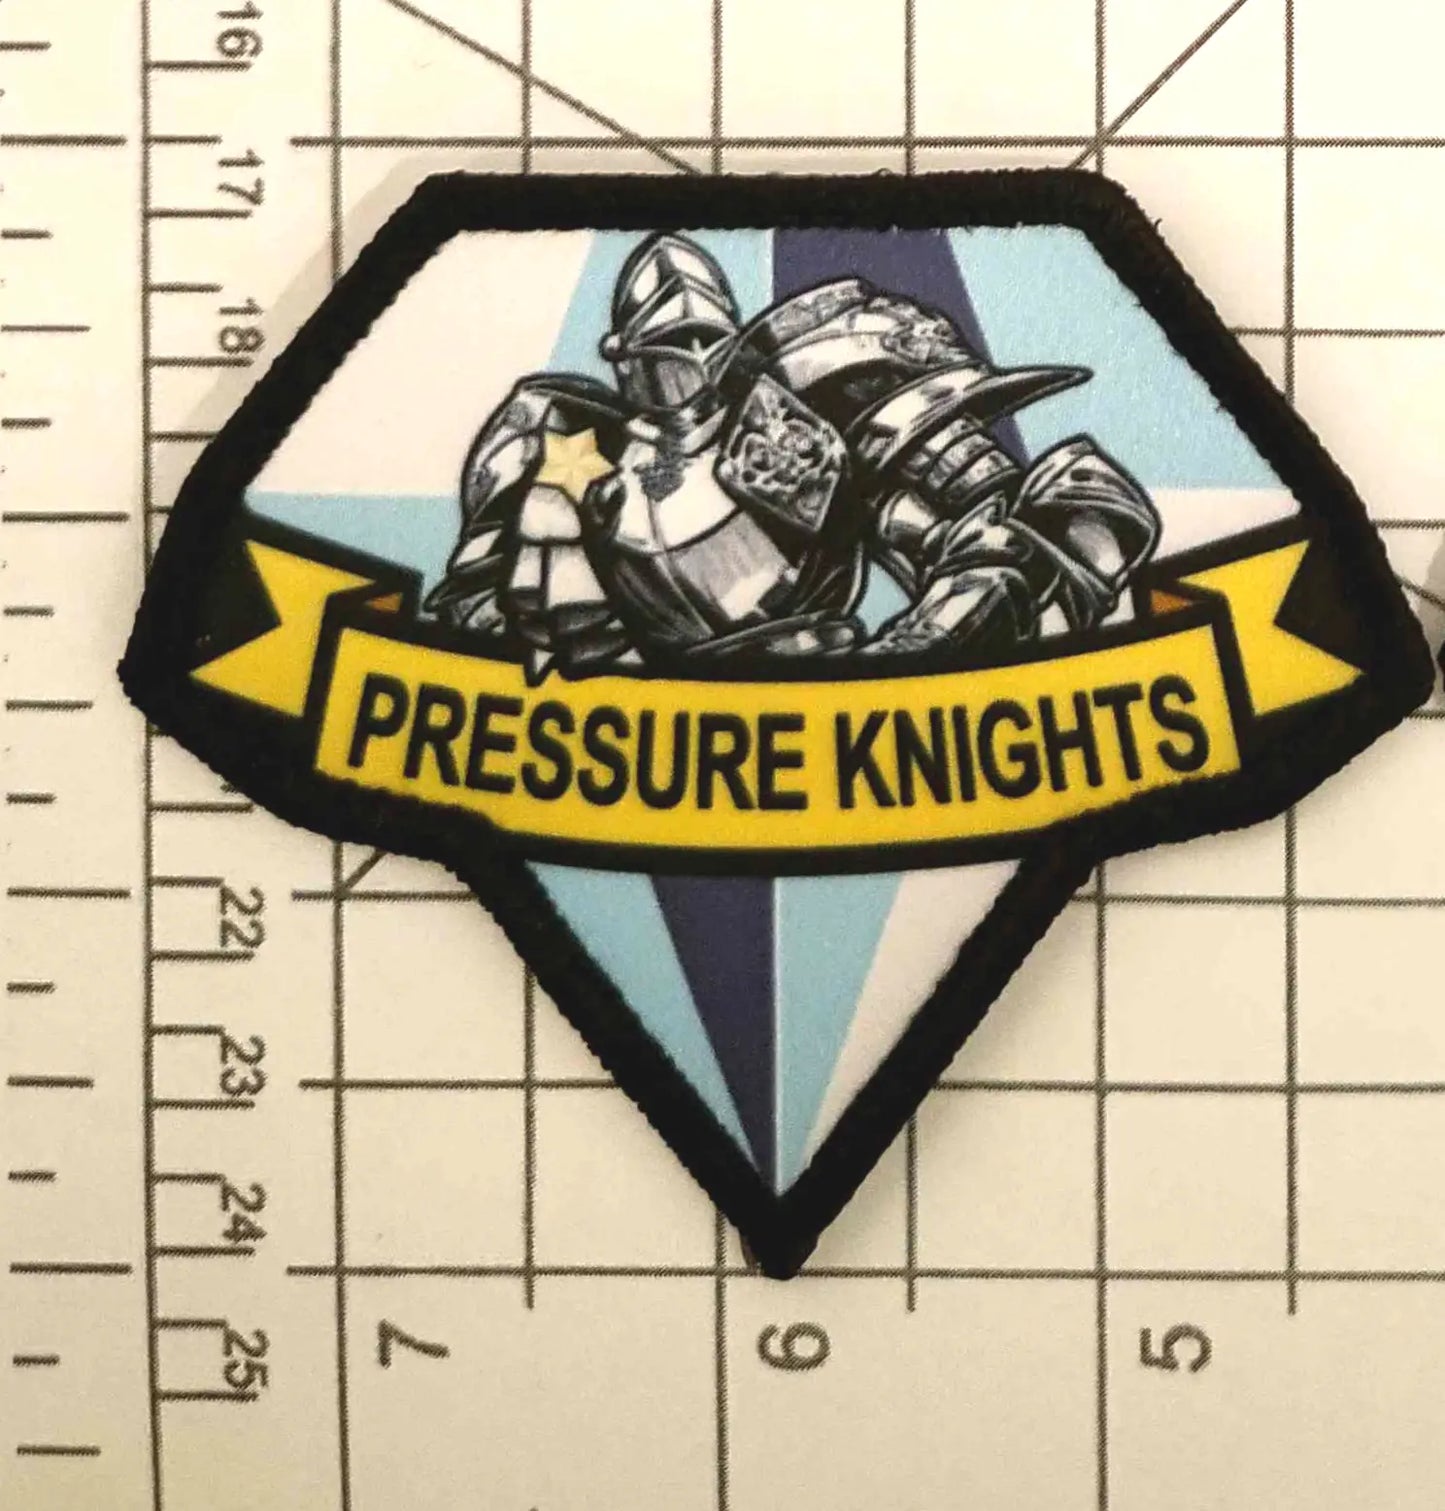 PRE-ORDER Jelly Hoshiumi Starknights / Pressure Knights patch (Velcro) - Diamond Dogs MGS style